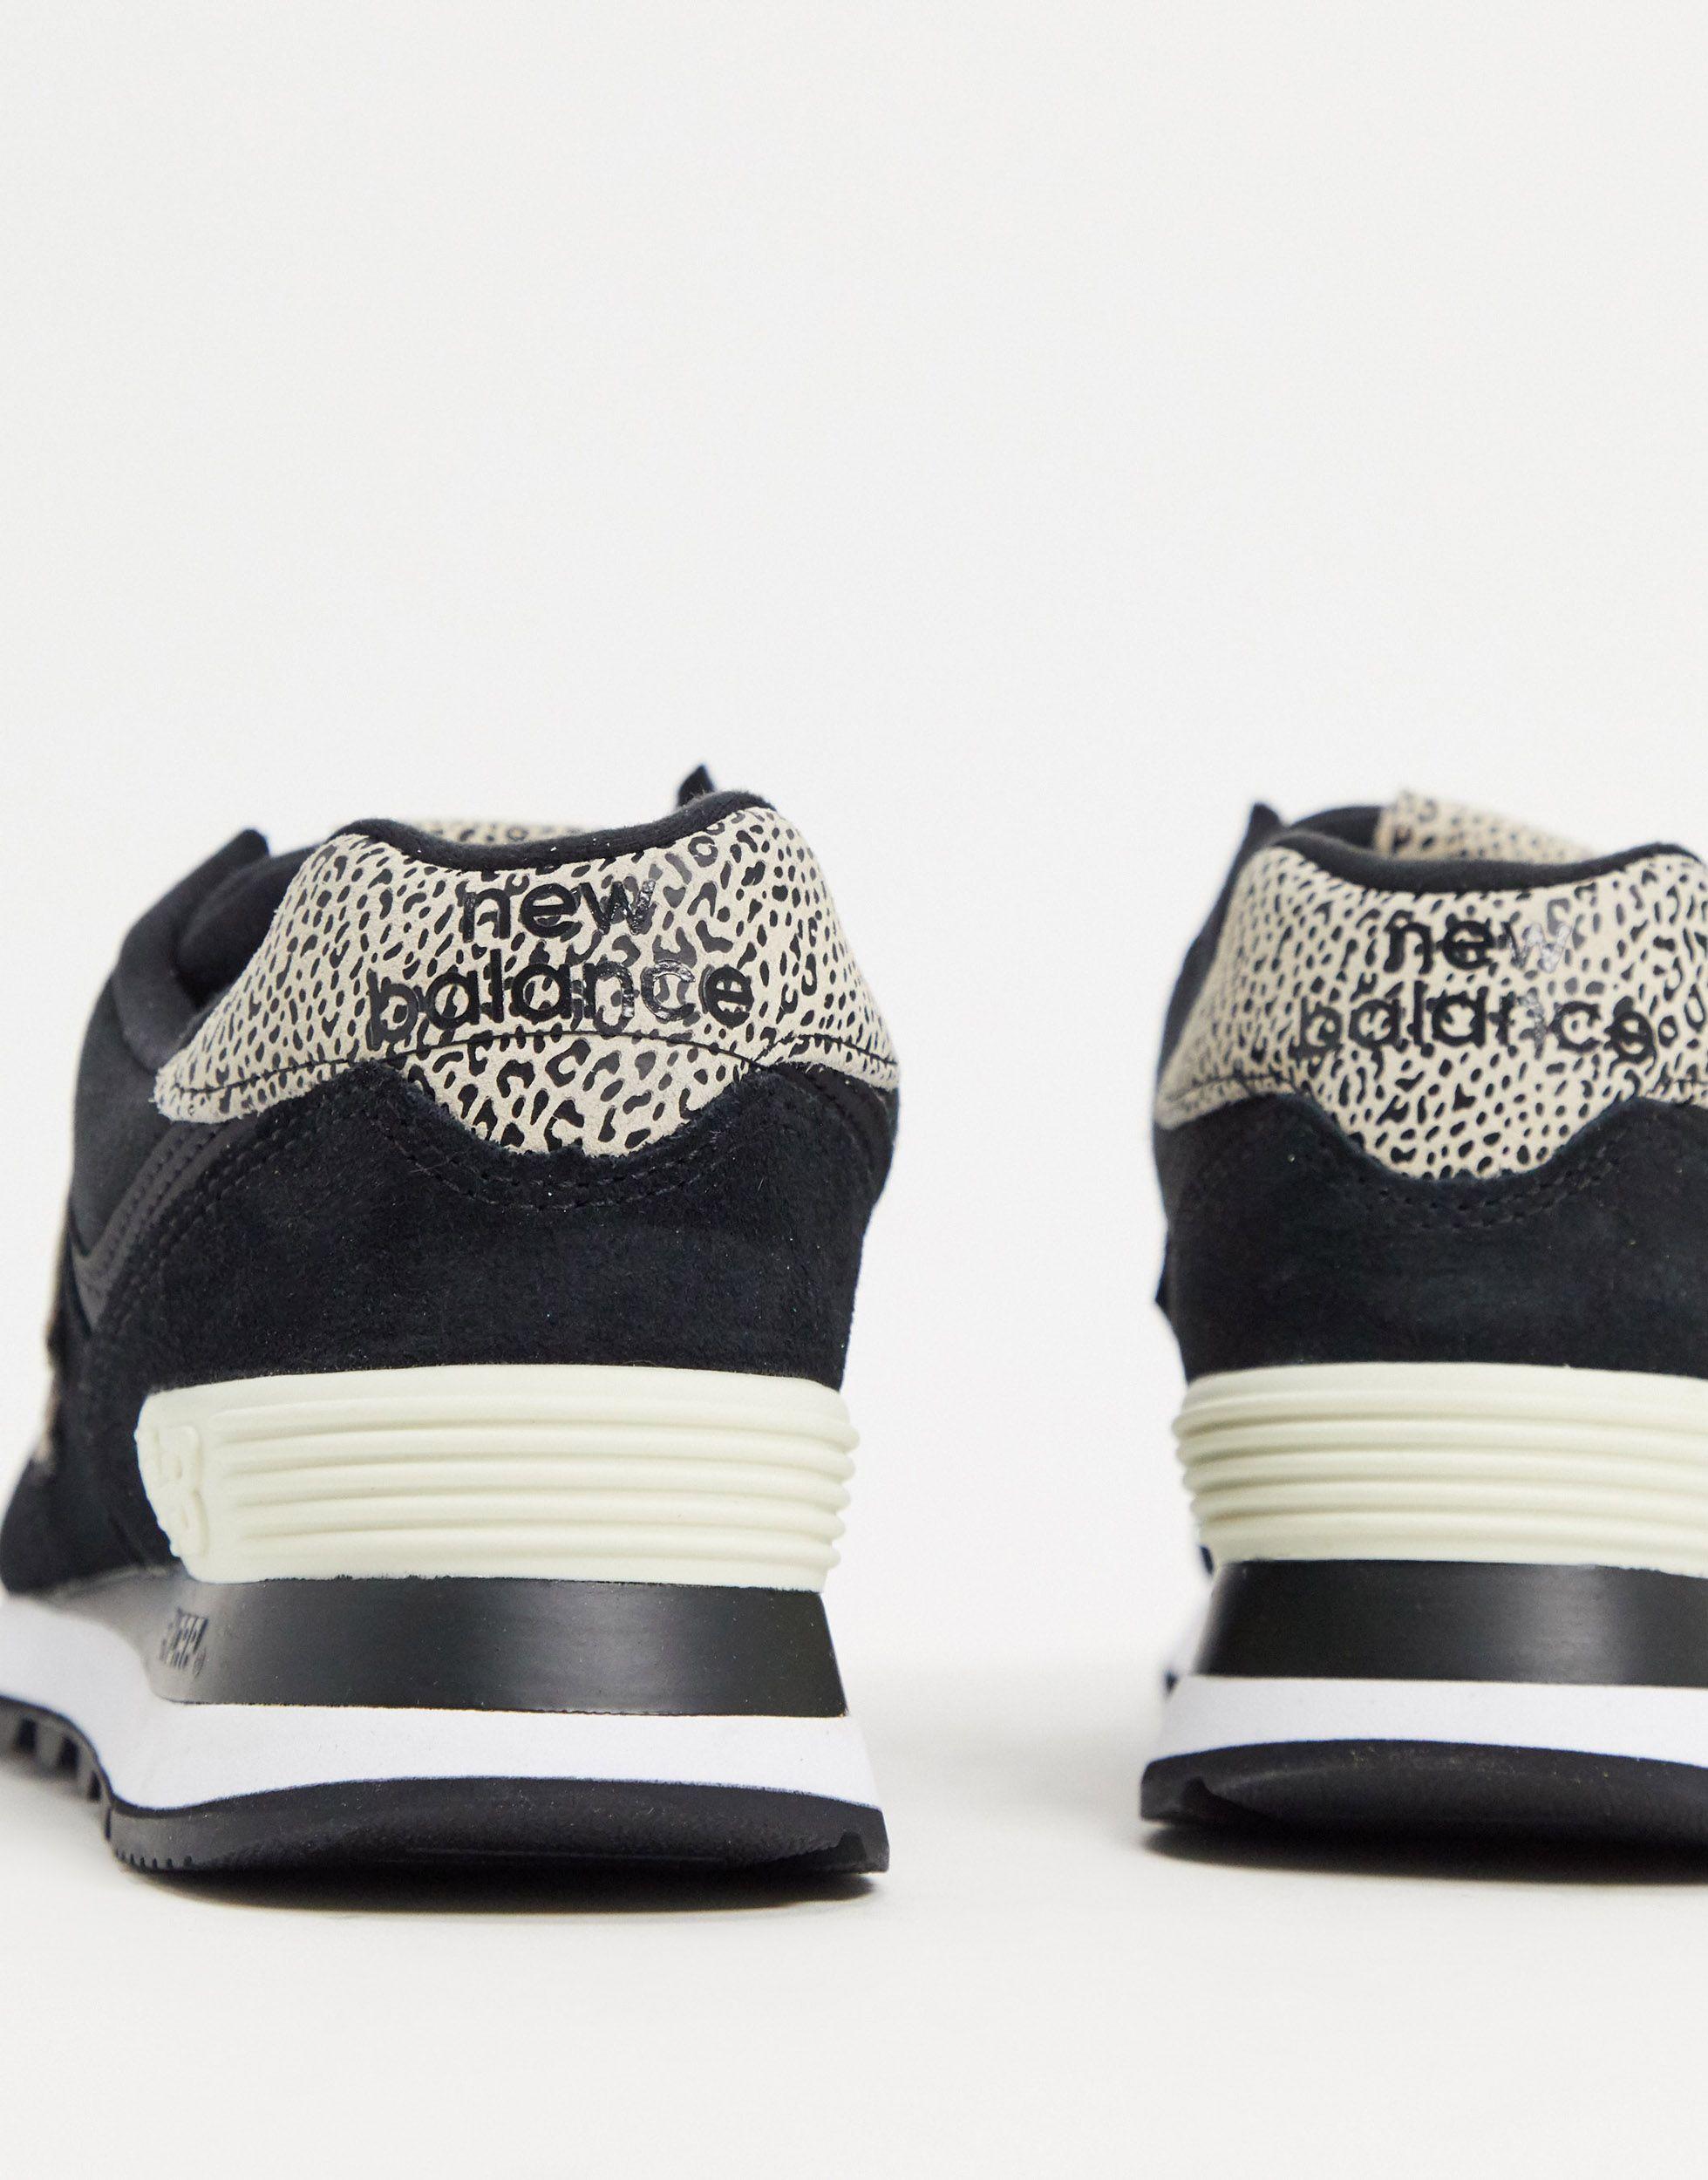 New Balance Rubber 574 Animal Print Trainers in Black | Lyst